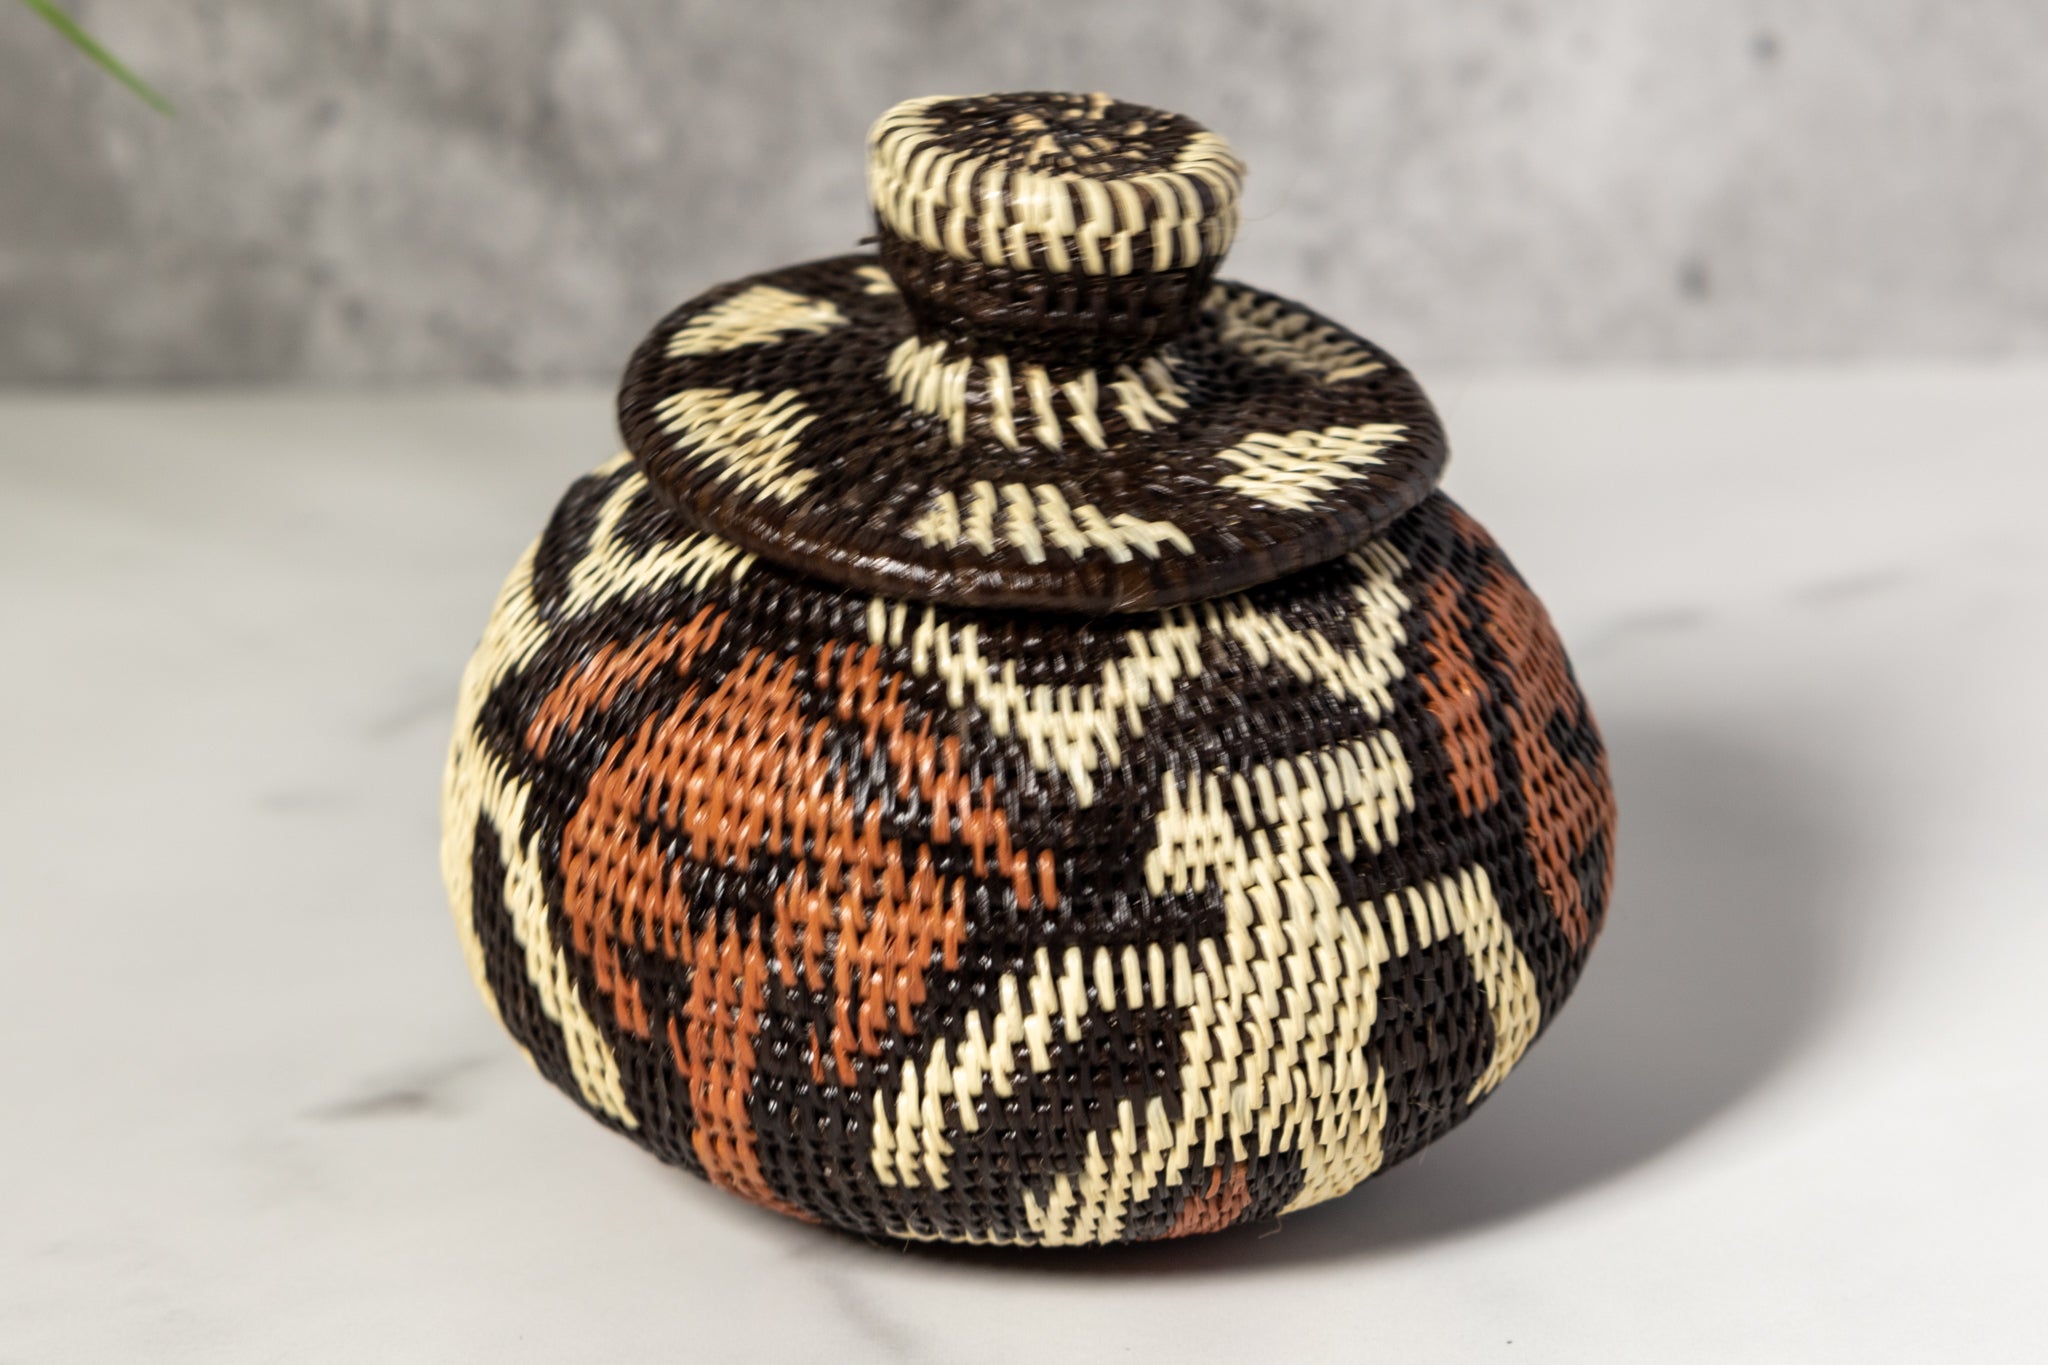 Human Cave Drawings Woven Basket With Top